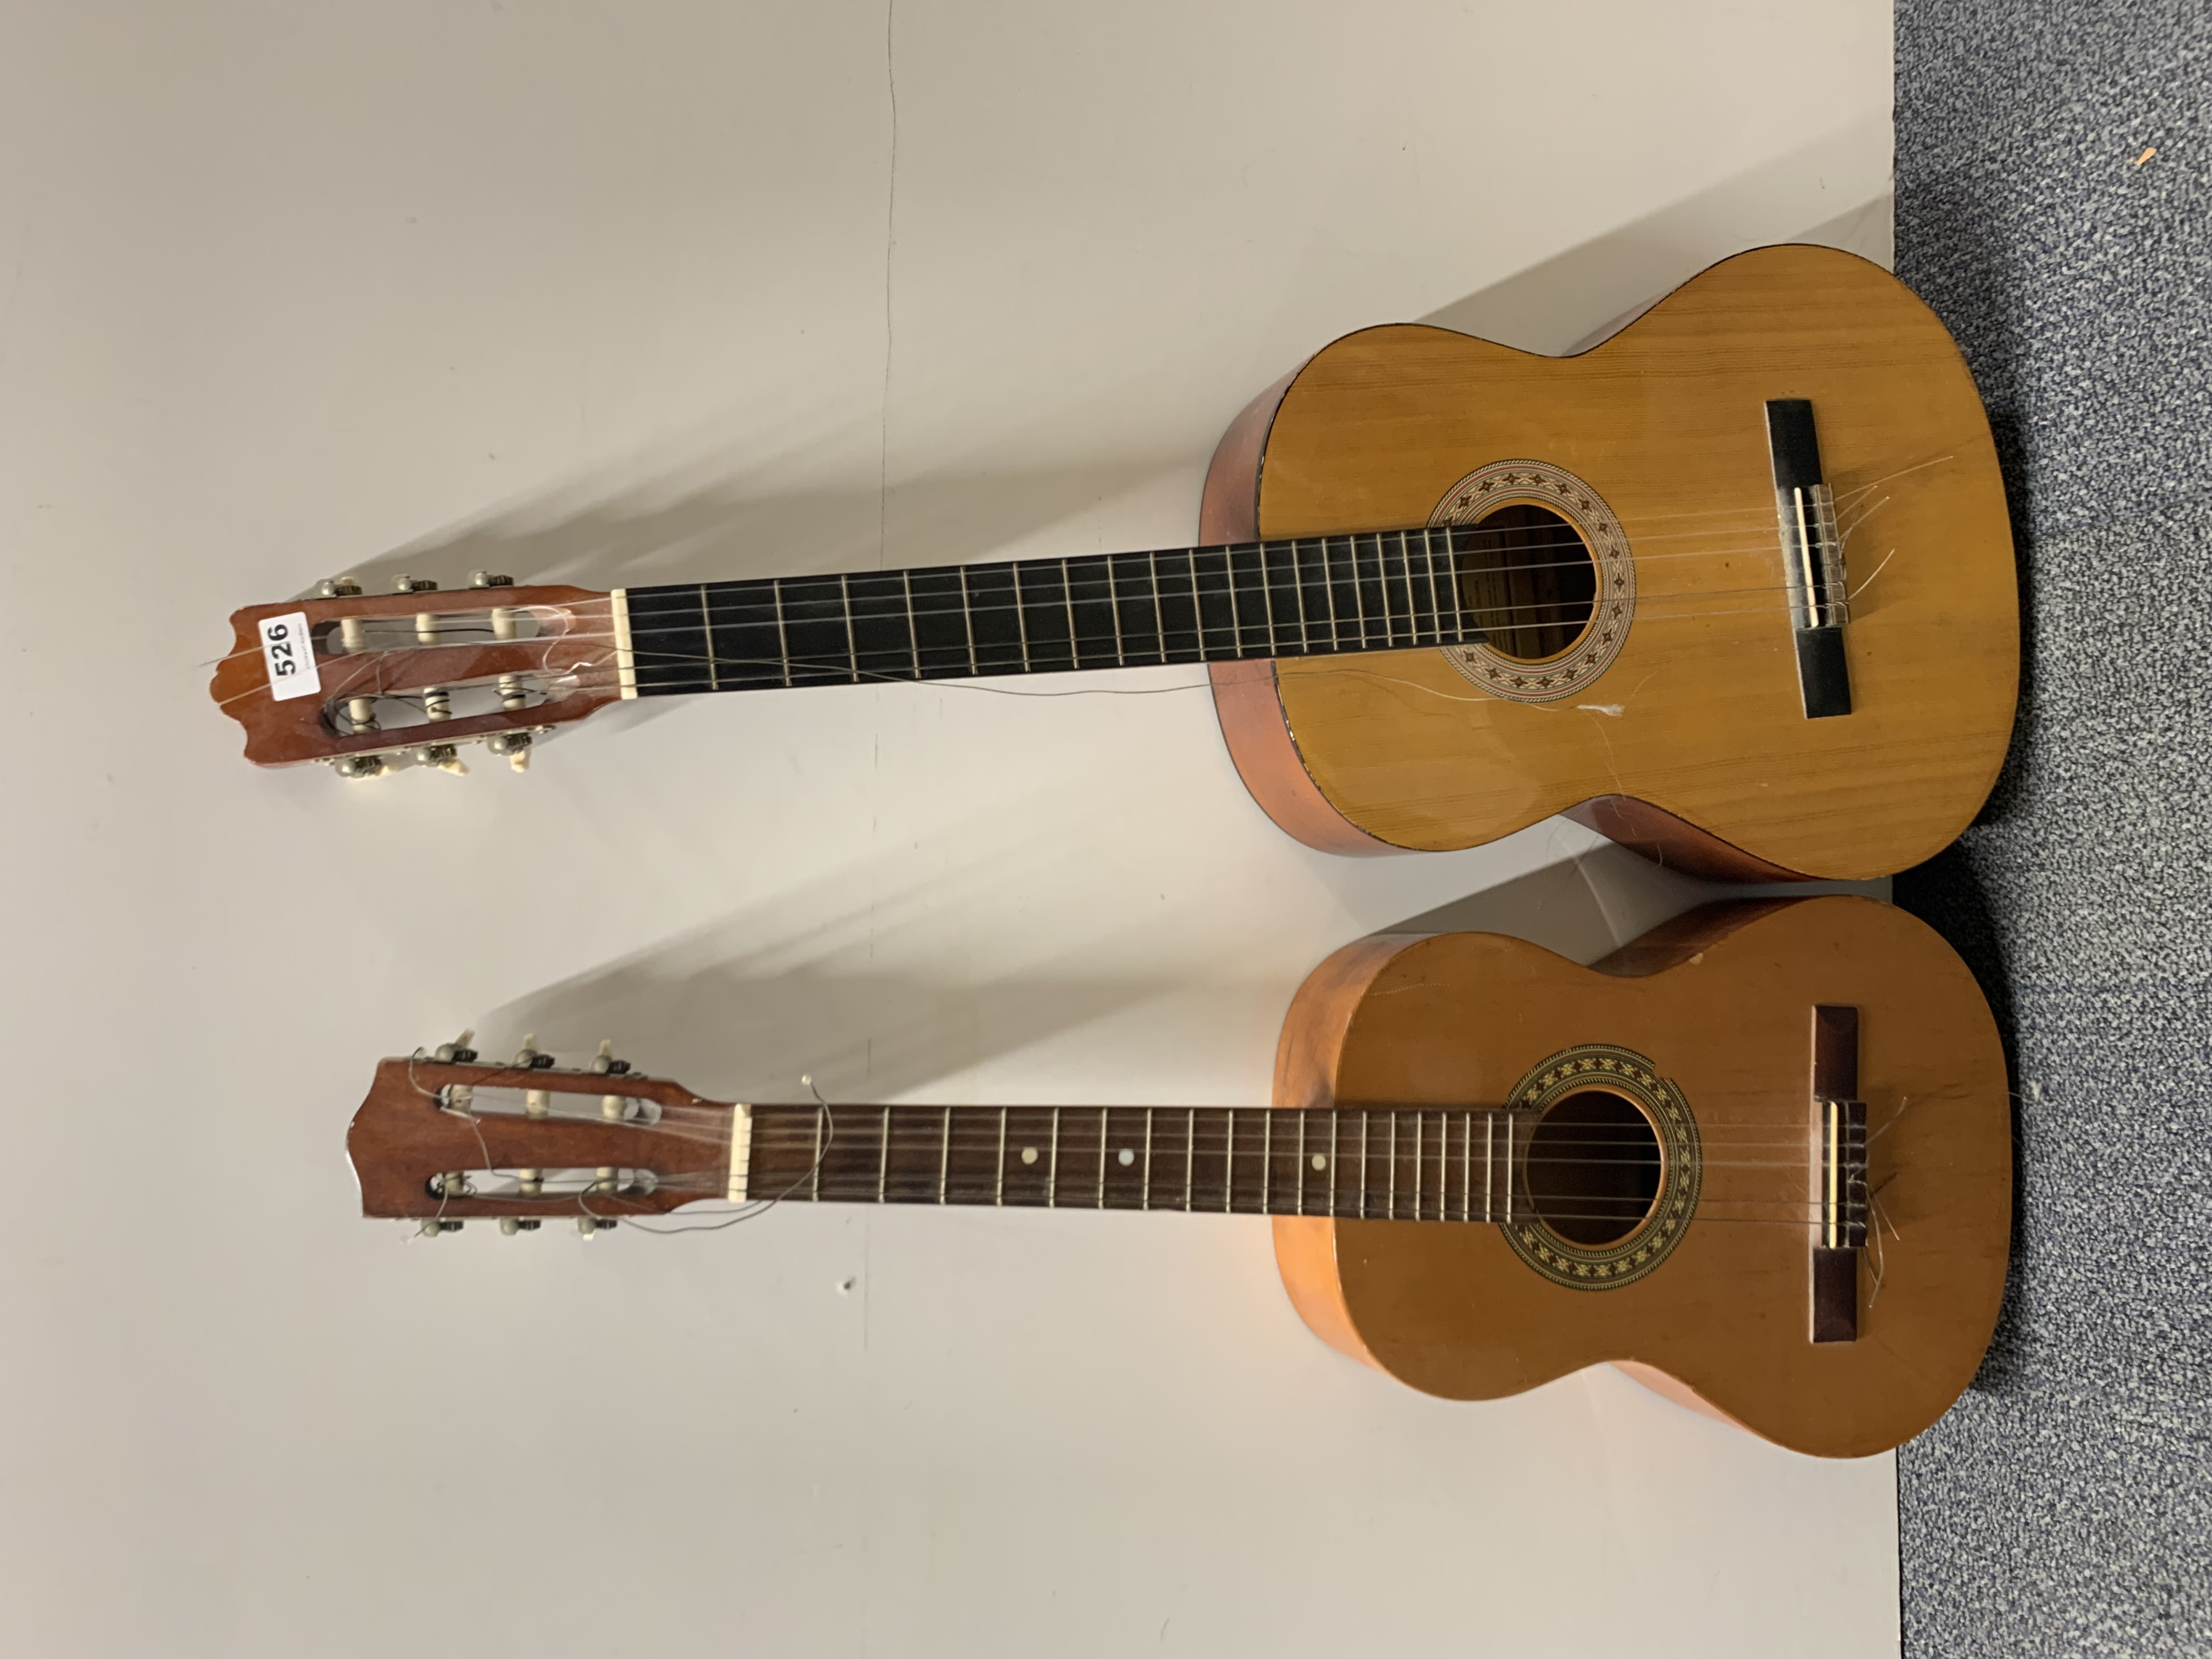 An acoustic guitar and a half size guitar. - Image 2 of 2